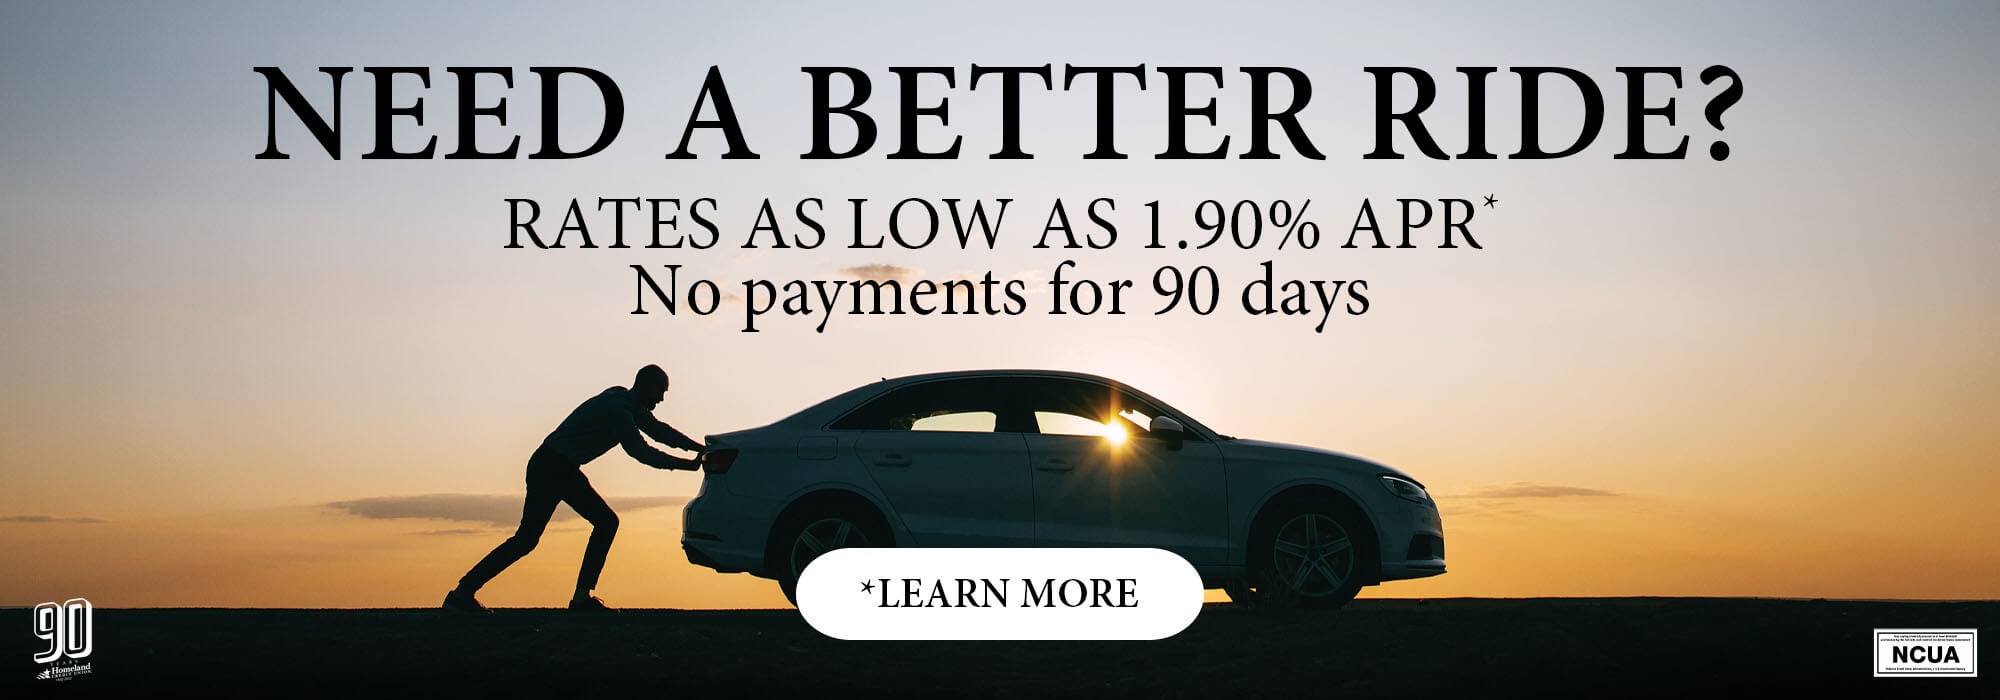 Need a better ride? Rates as low as 1.90% APR* no payments for 90 days. *Learn More.